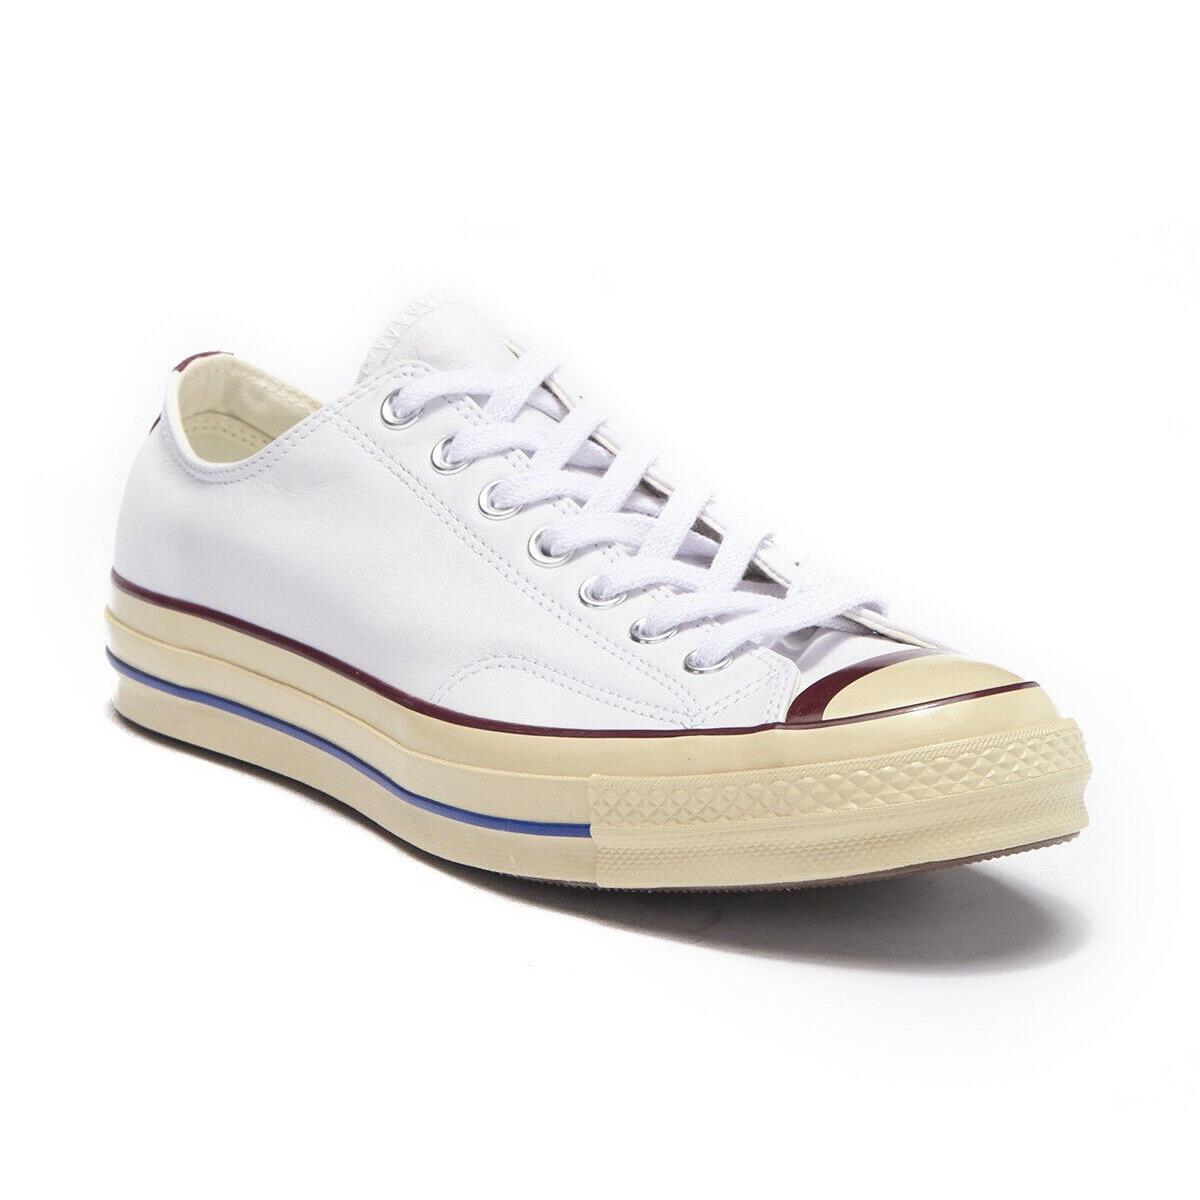 Converse Unisex `chuck 70 Ox` White/red/tan Lo-top Shoes - W 12.5 / M 10.5